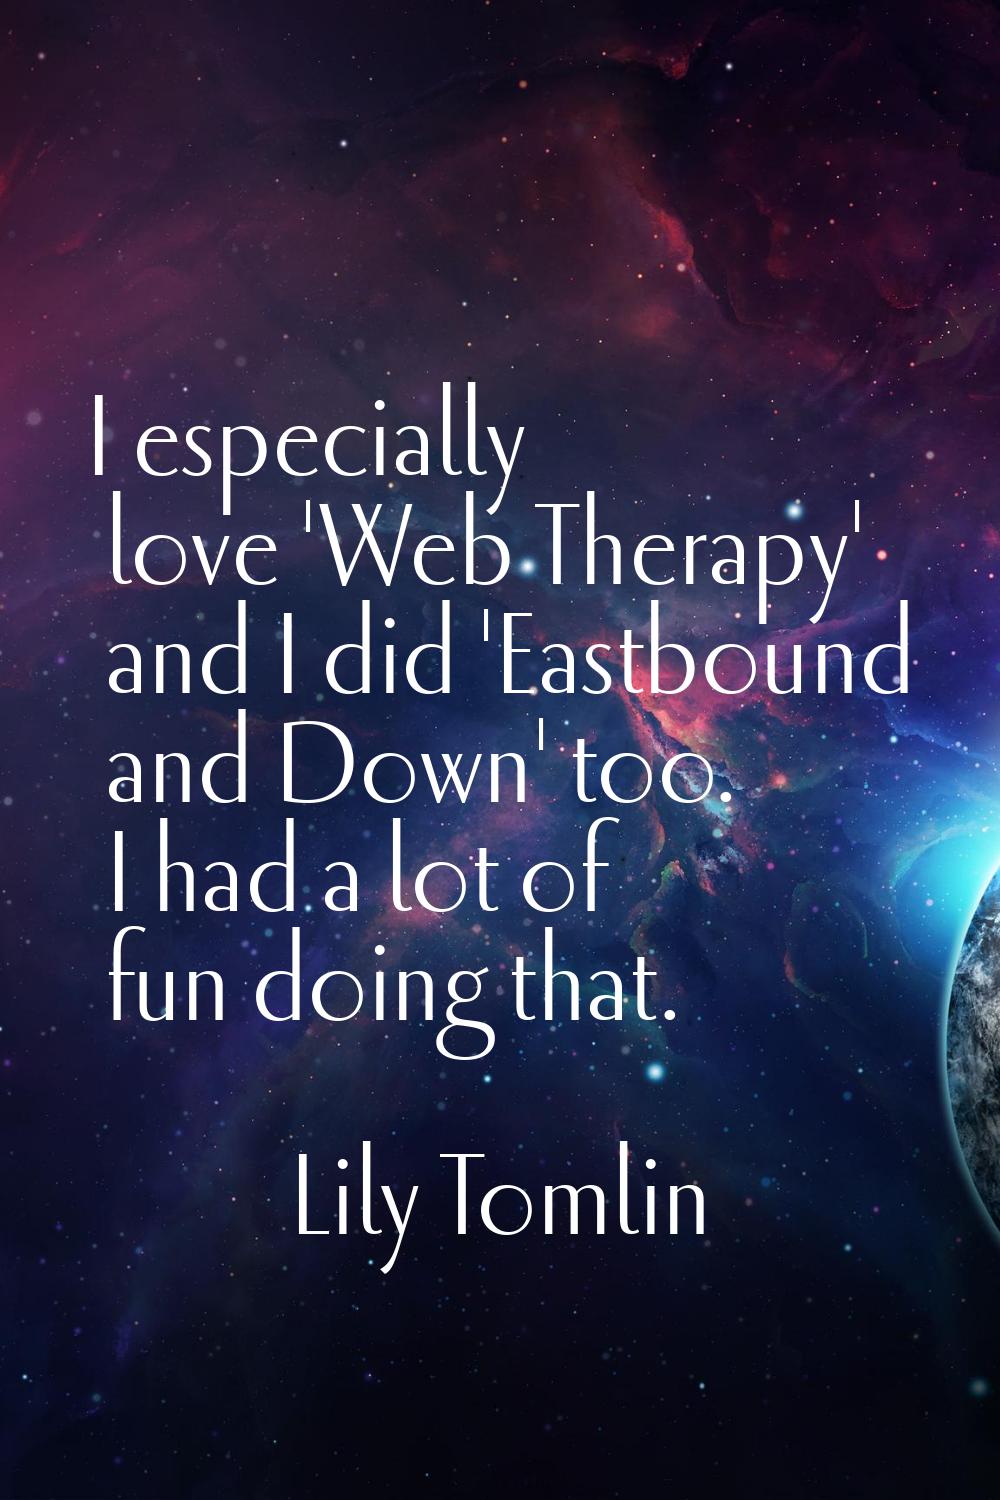 I especially love 'Web Therapy' and I did 'Eastbound and Down' too. I had a lot of fun doing that.